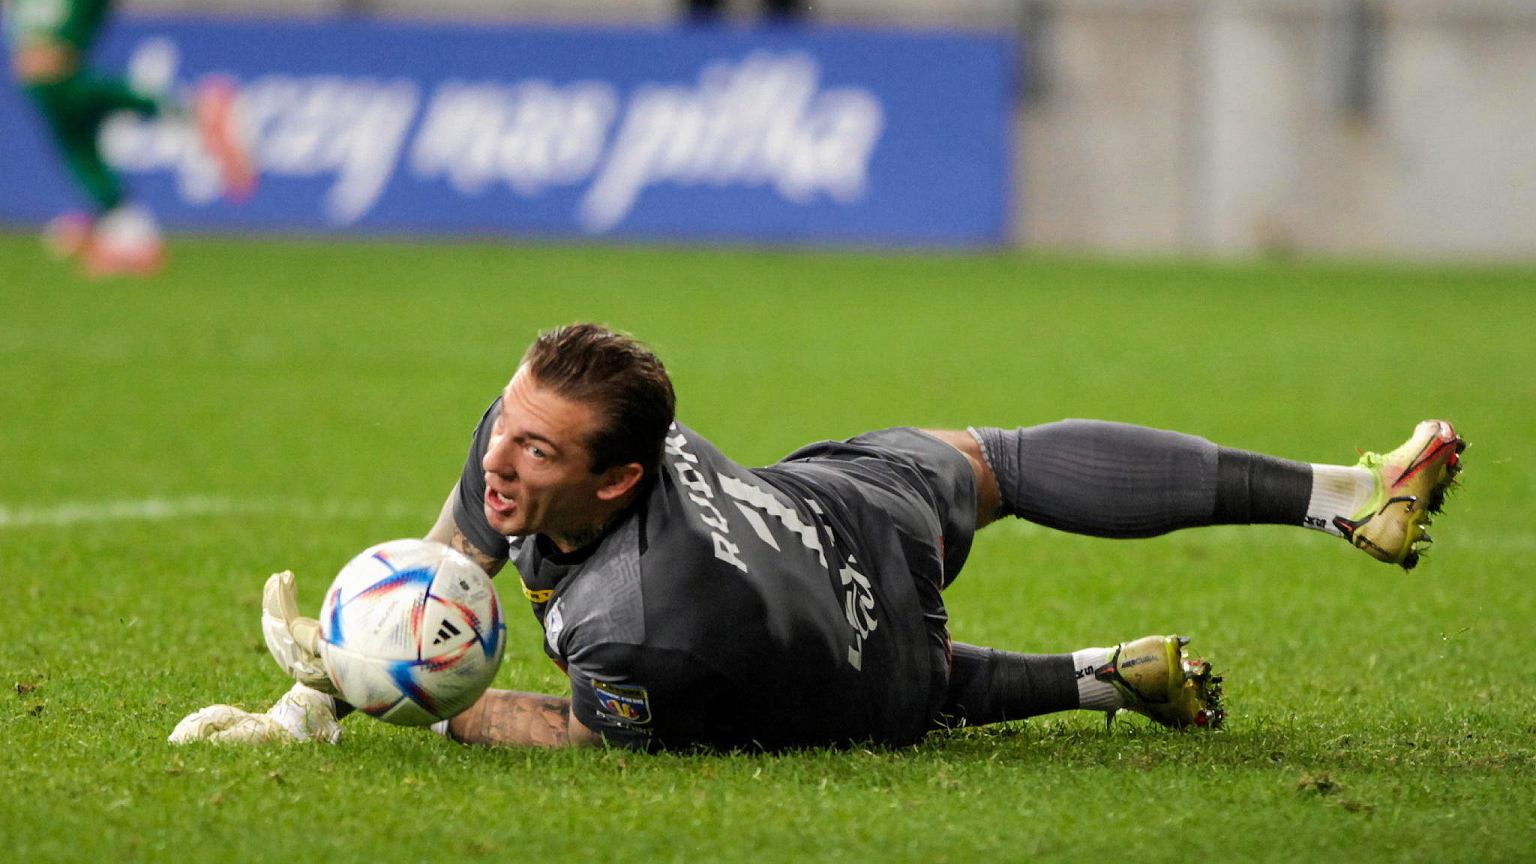 Lech Poznan wants the leading goalkeeper in the league.  Looking for a successor to Rudka Pika Nona